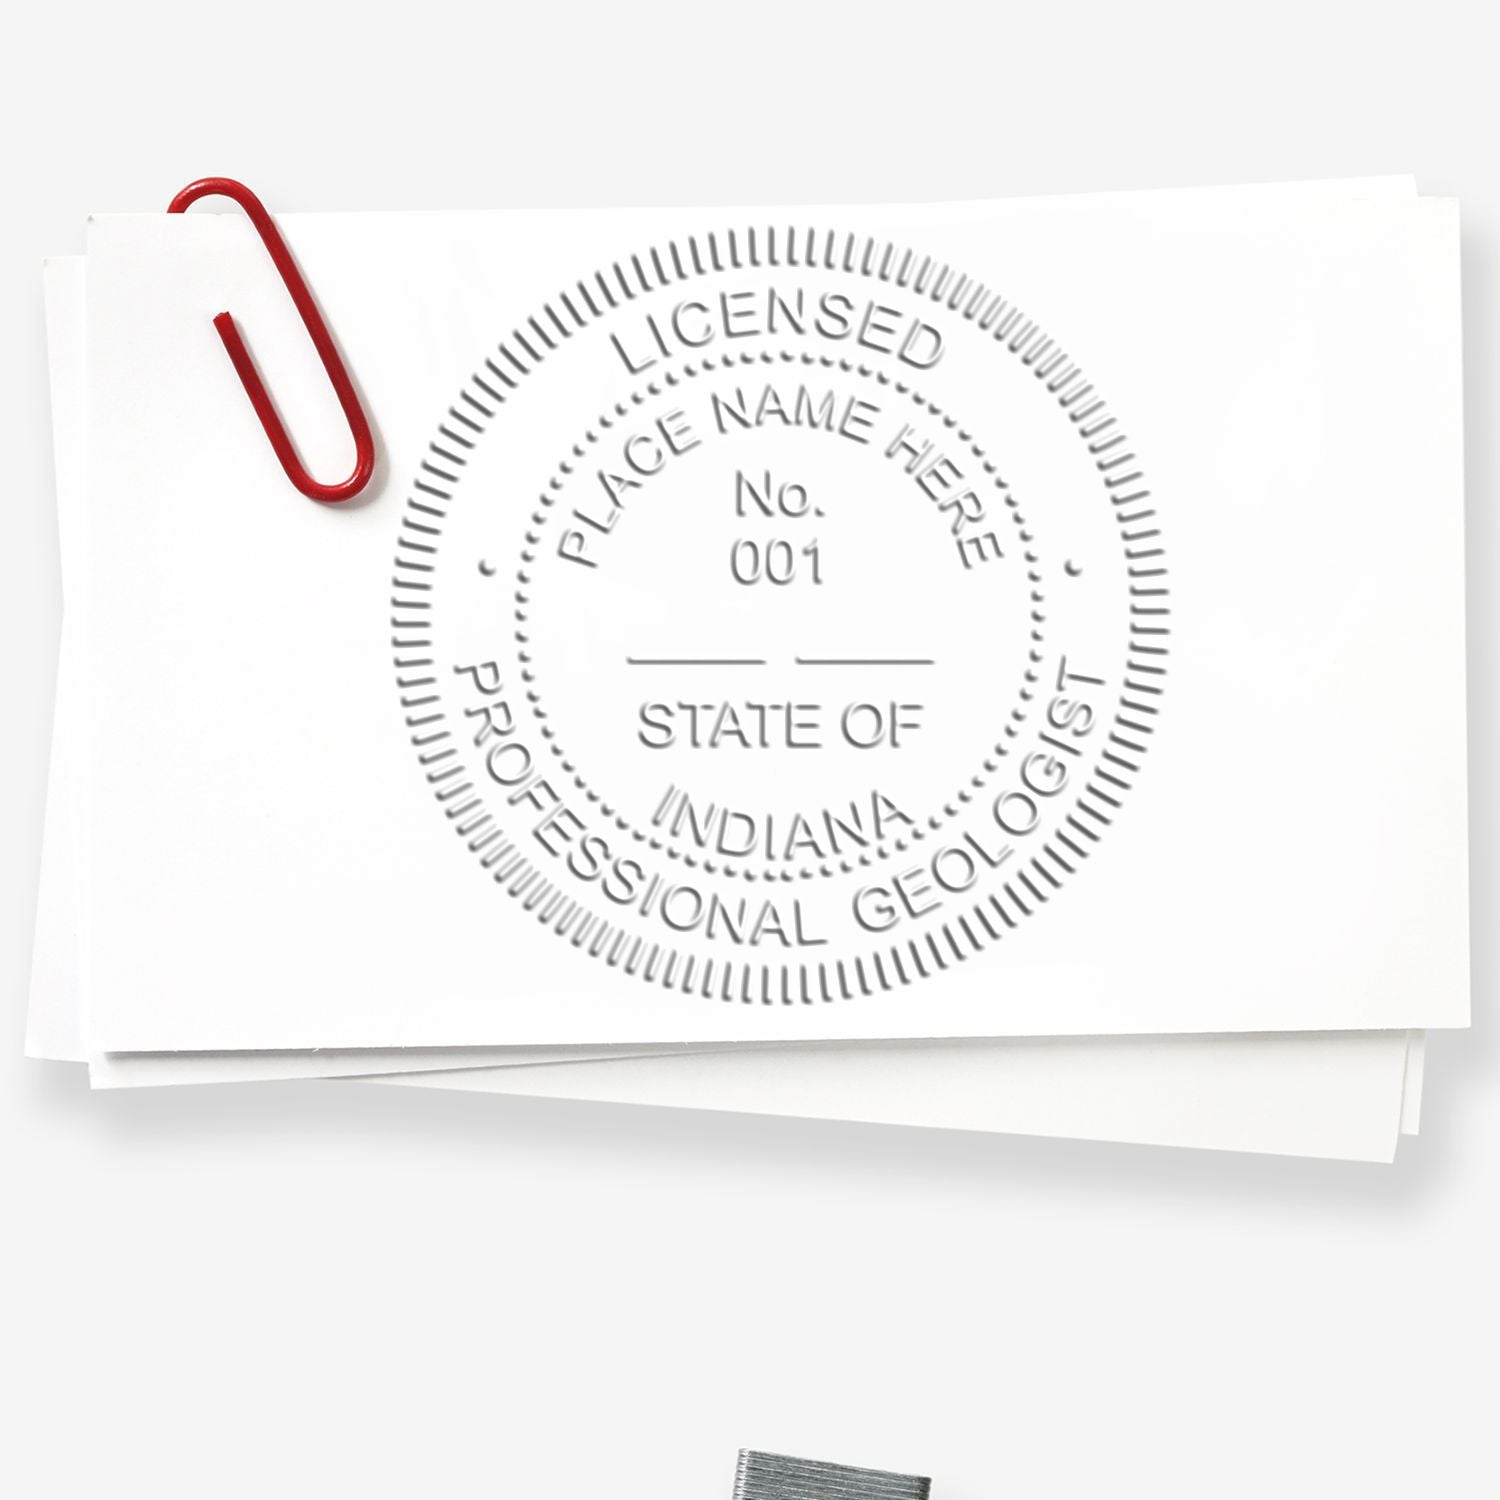 A lifestyle photo showing a stamped image of the Heavy Duty Cast Iron Indiana Geologist Seal Embosser on a piece of paper